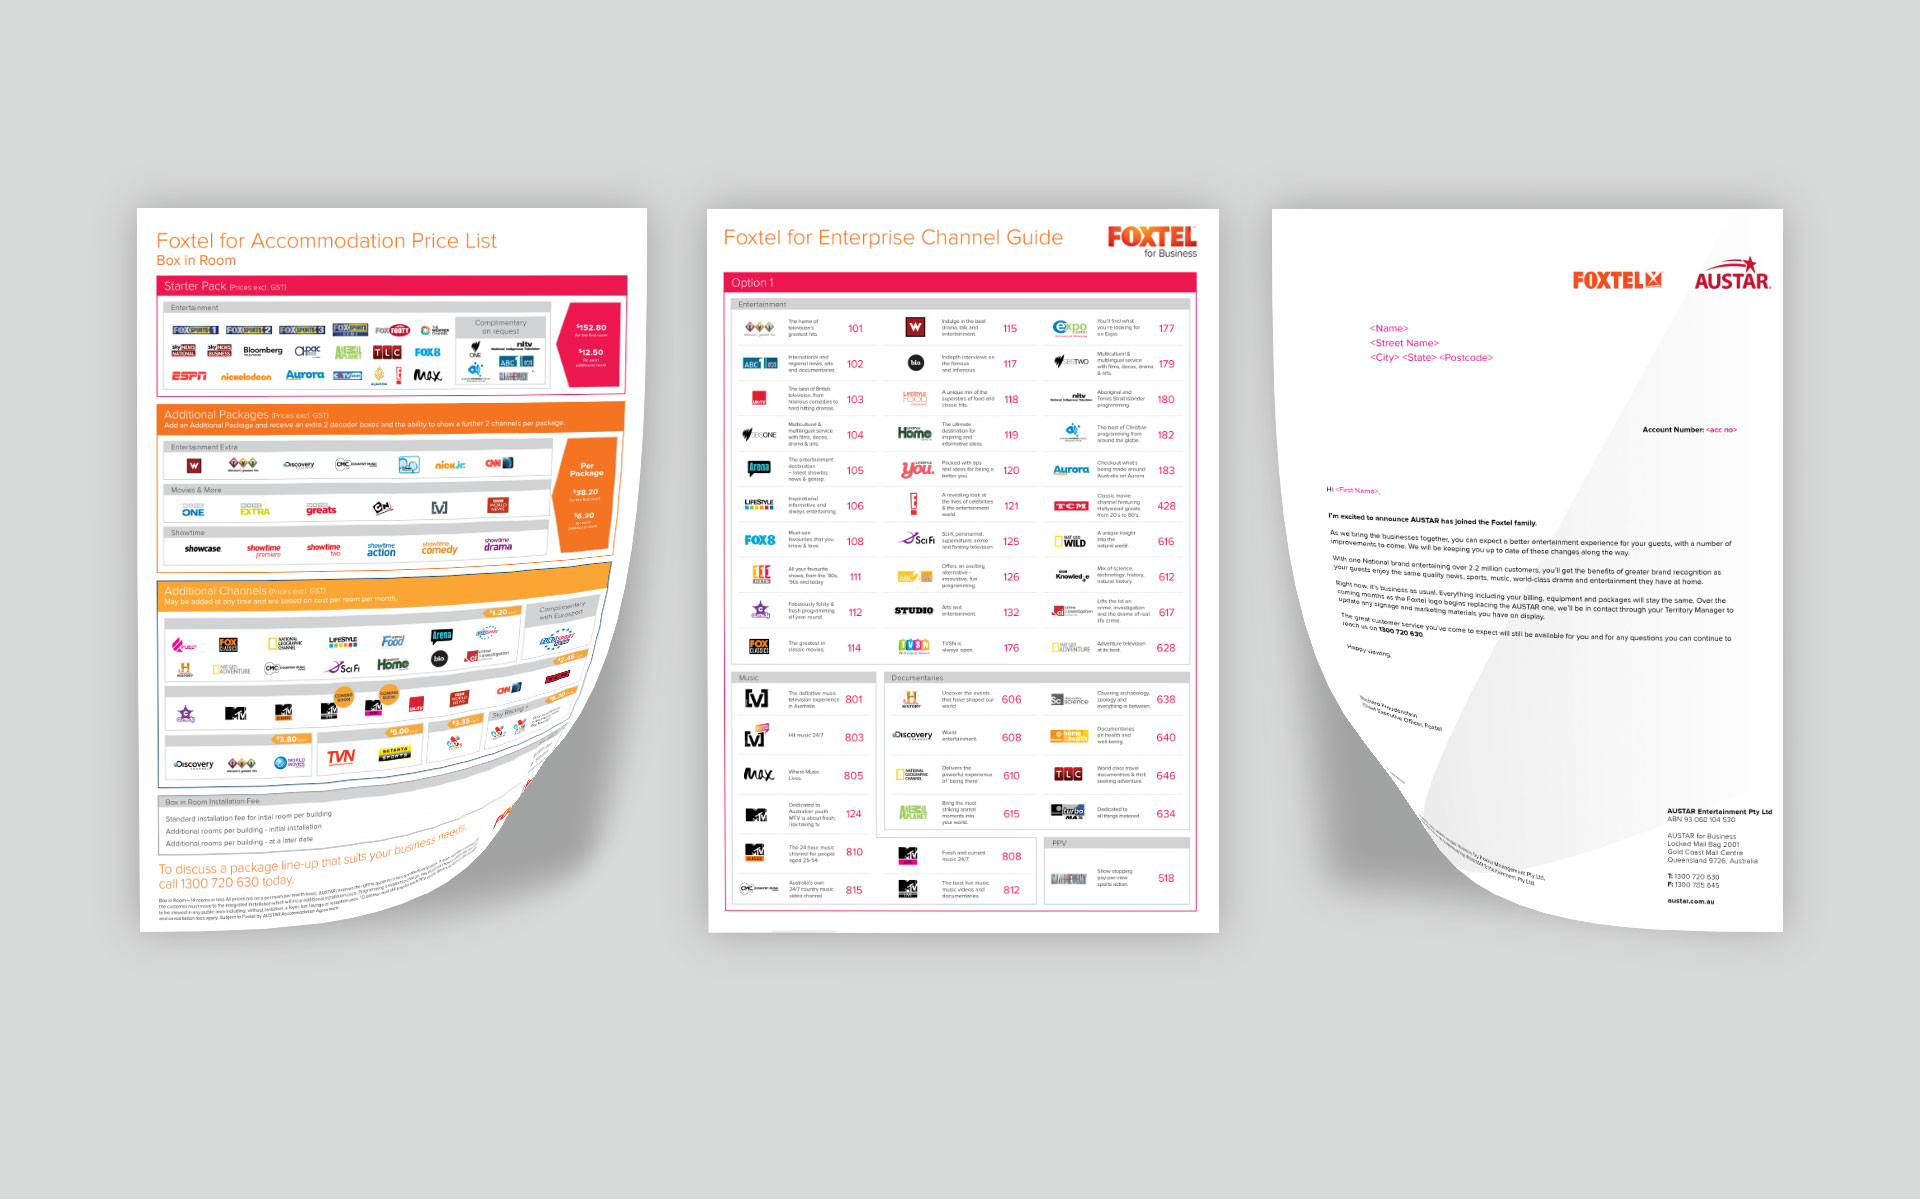 FOXTEL marketing, advertising & publications designed by Amy Howard